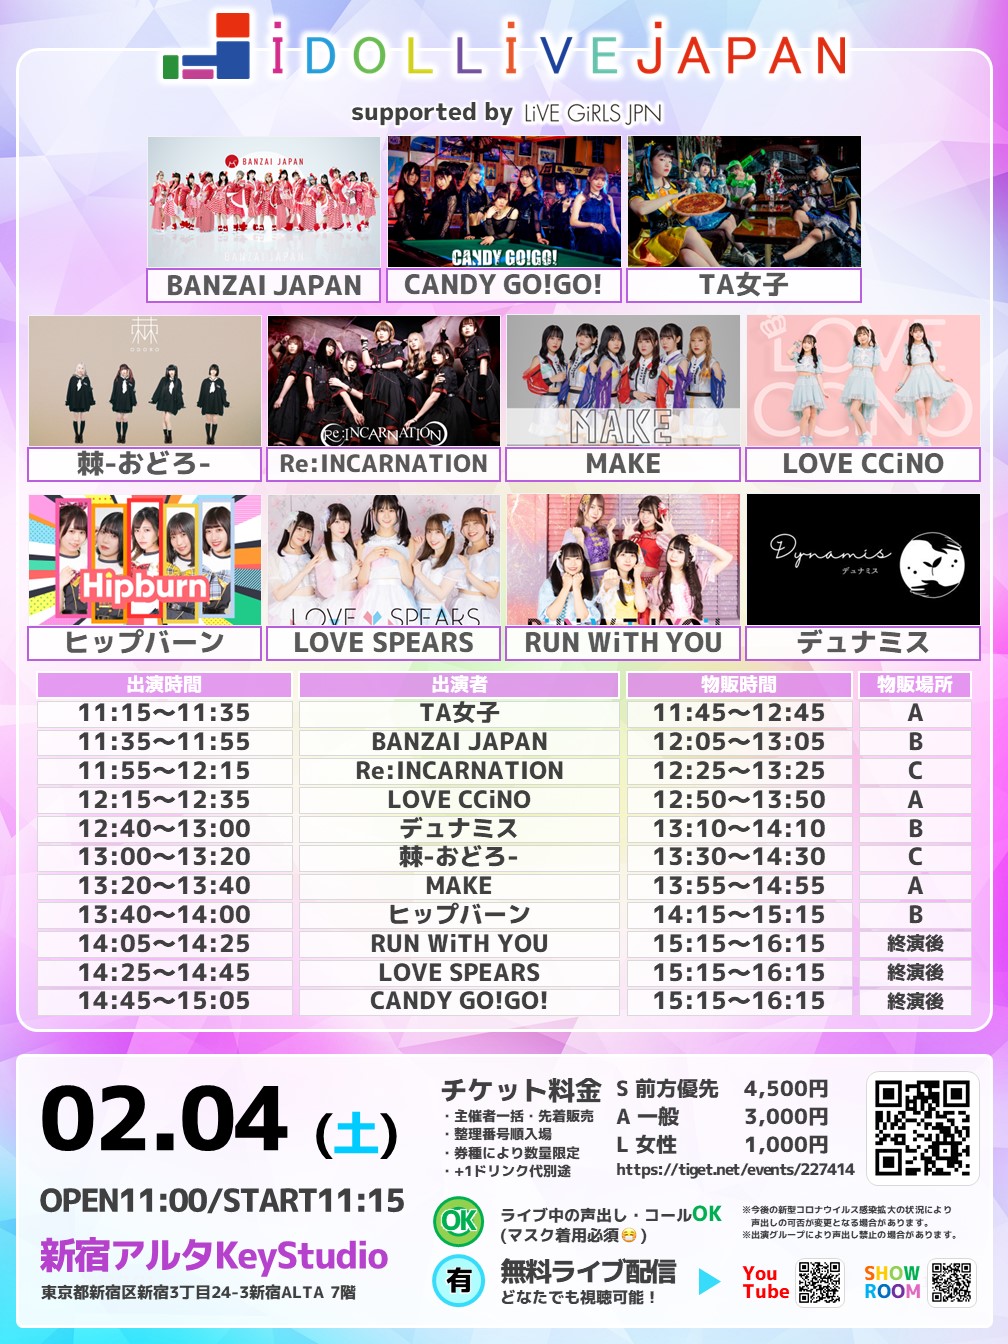 IDOL LIVE JAPAN supported by LiVE GiRLS JPN